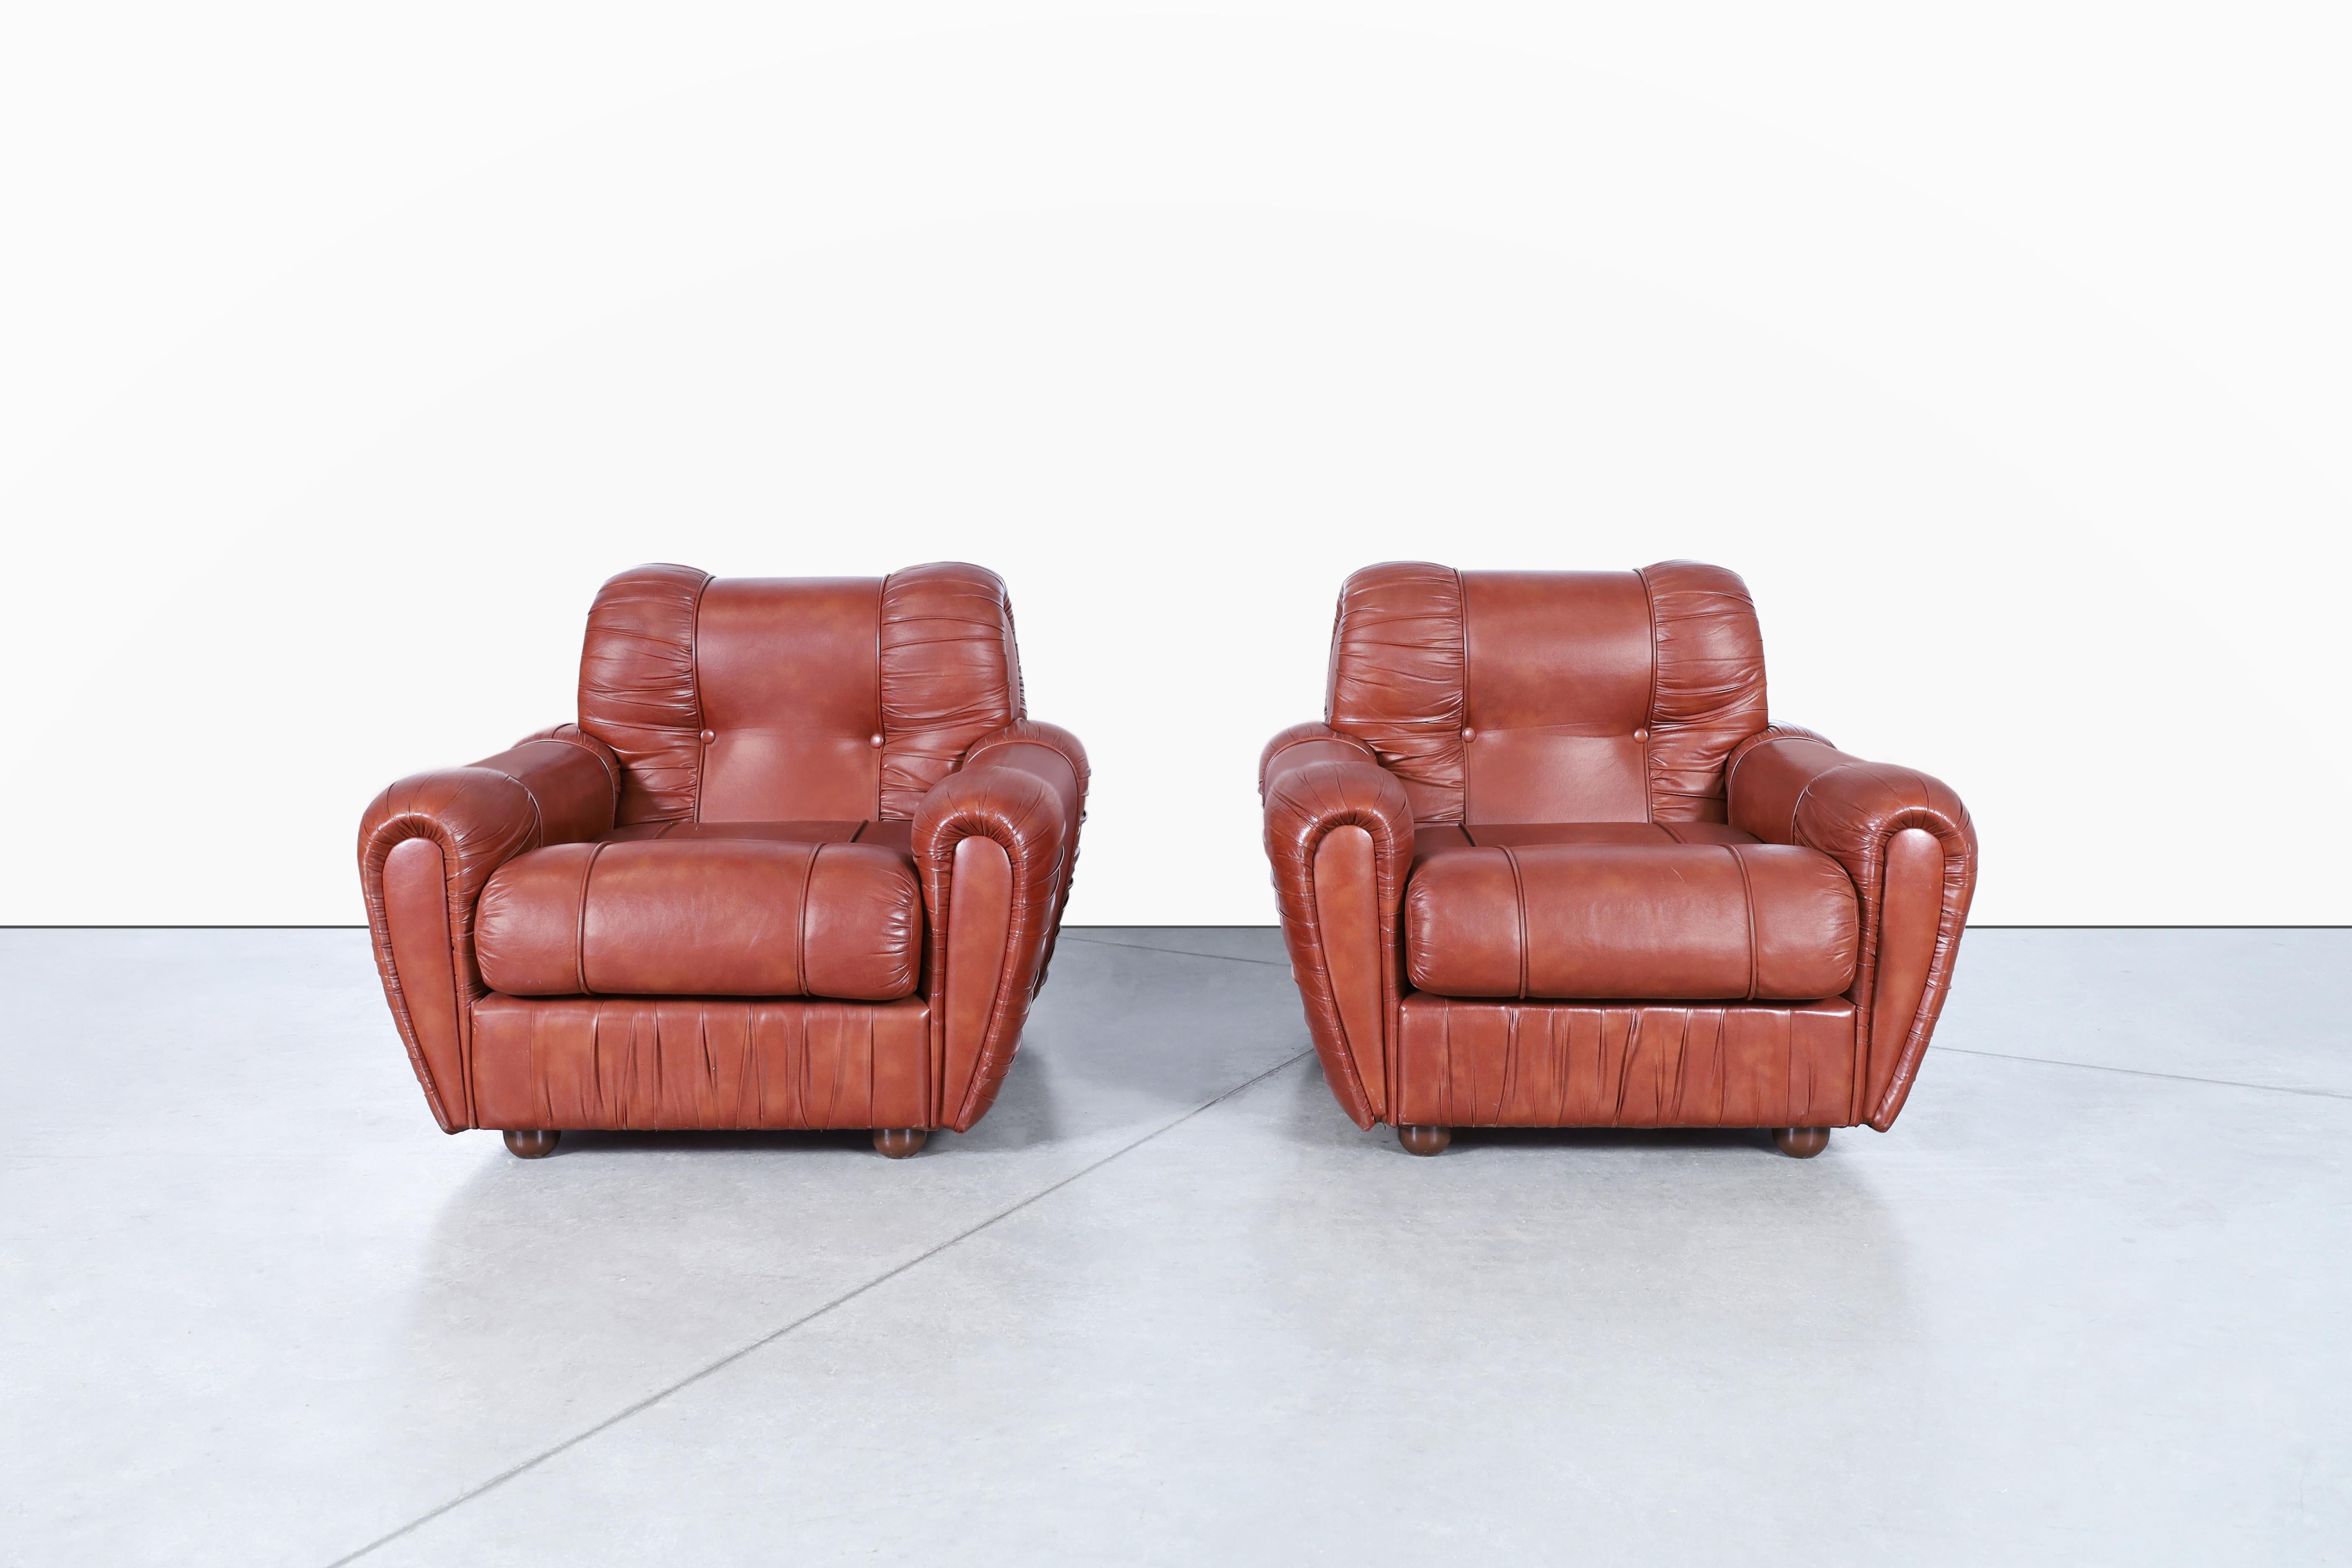 These beautiful vintage Italian leatherette lounge chairs are a true testament to the avant-garde design and exceptional craftsmanship of the 1980s Italian furniture industry. The chairs boast a strikingly welcoming design that is both elegant and